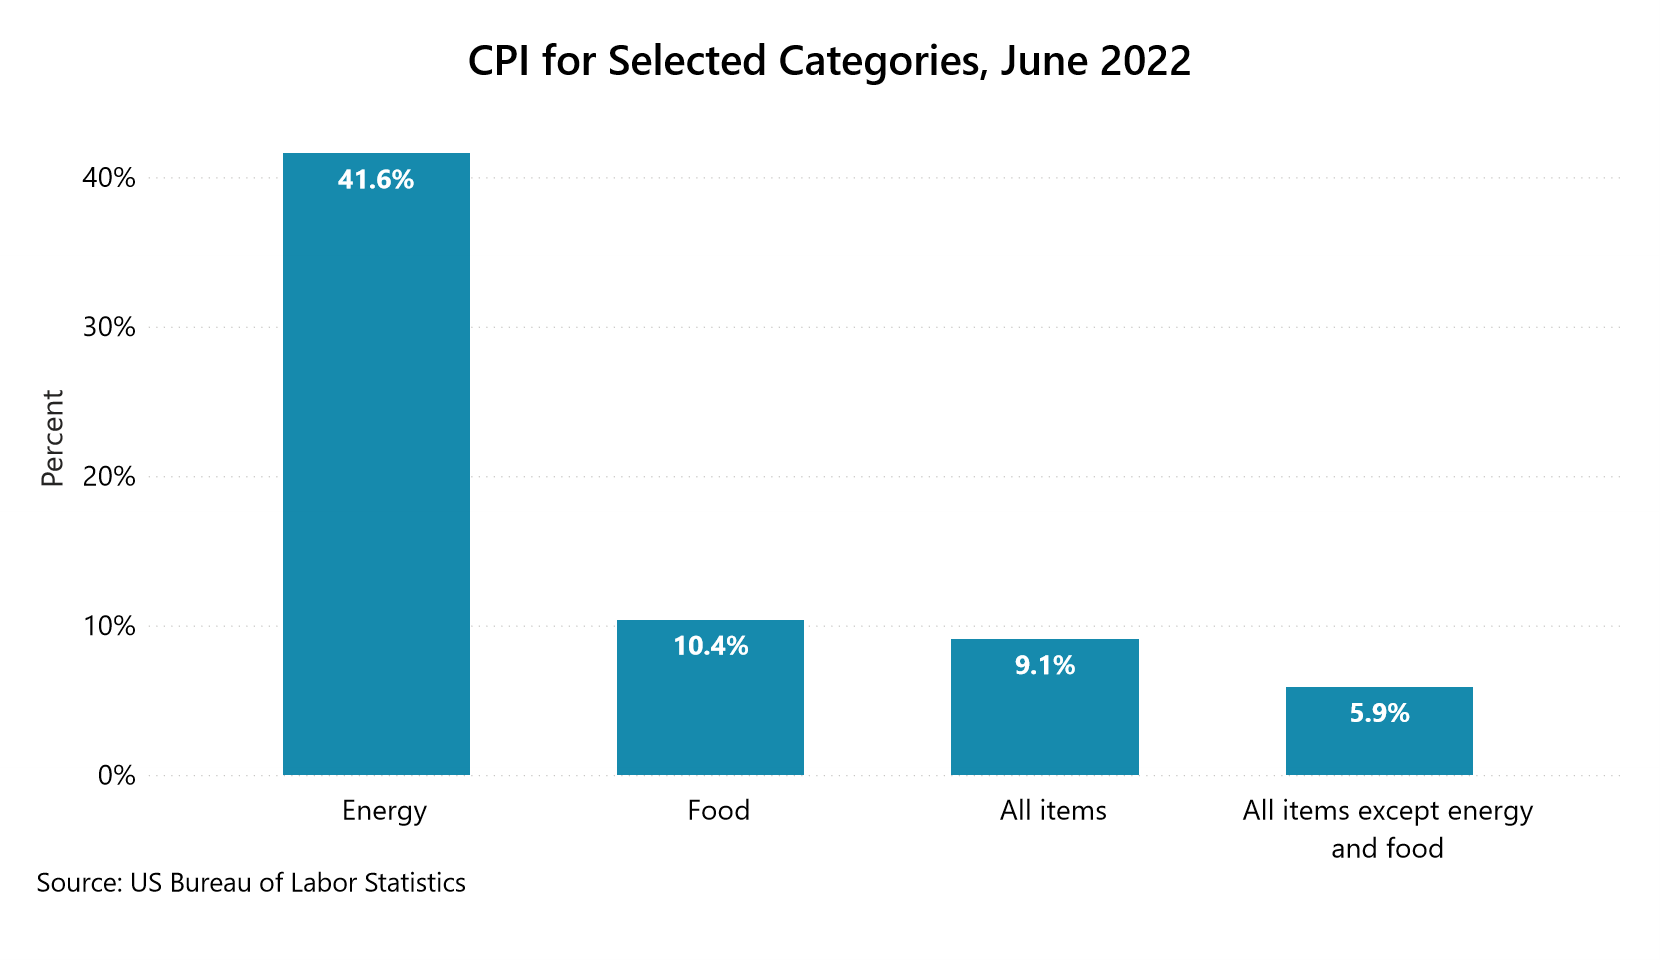 CPI for selected categories in June 2022